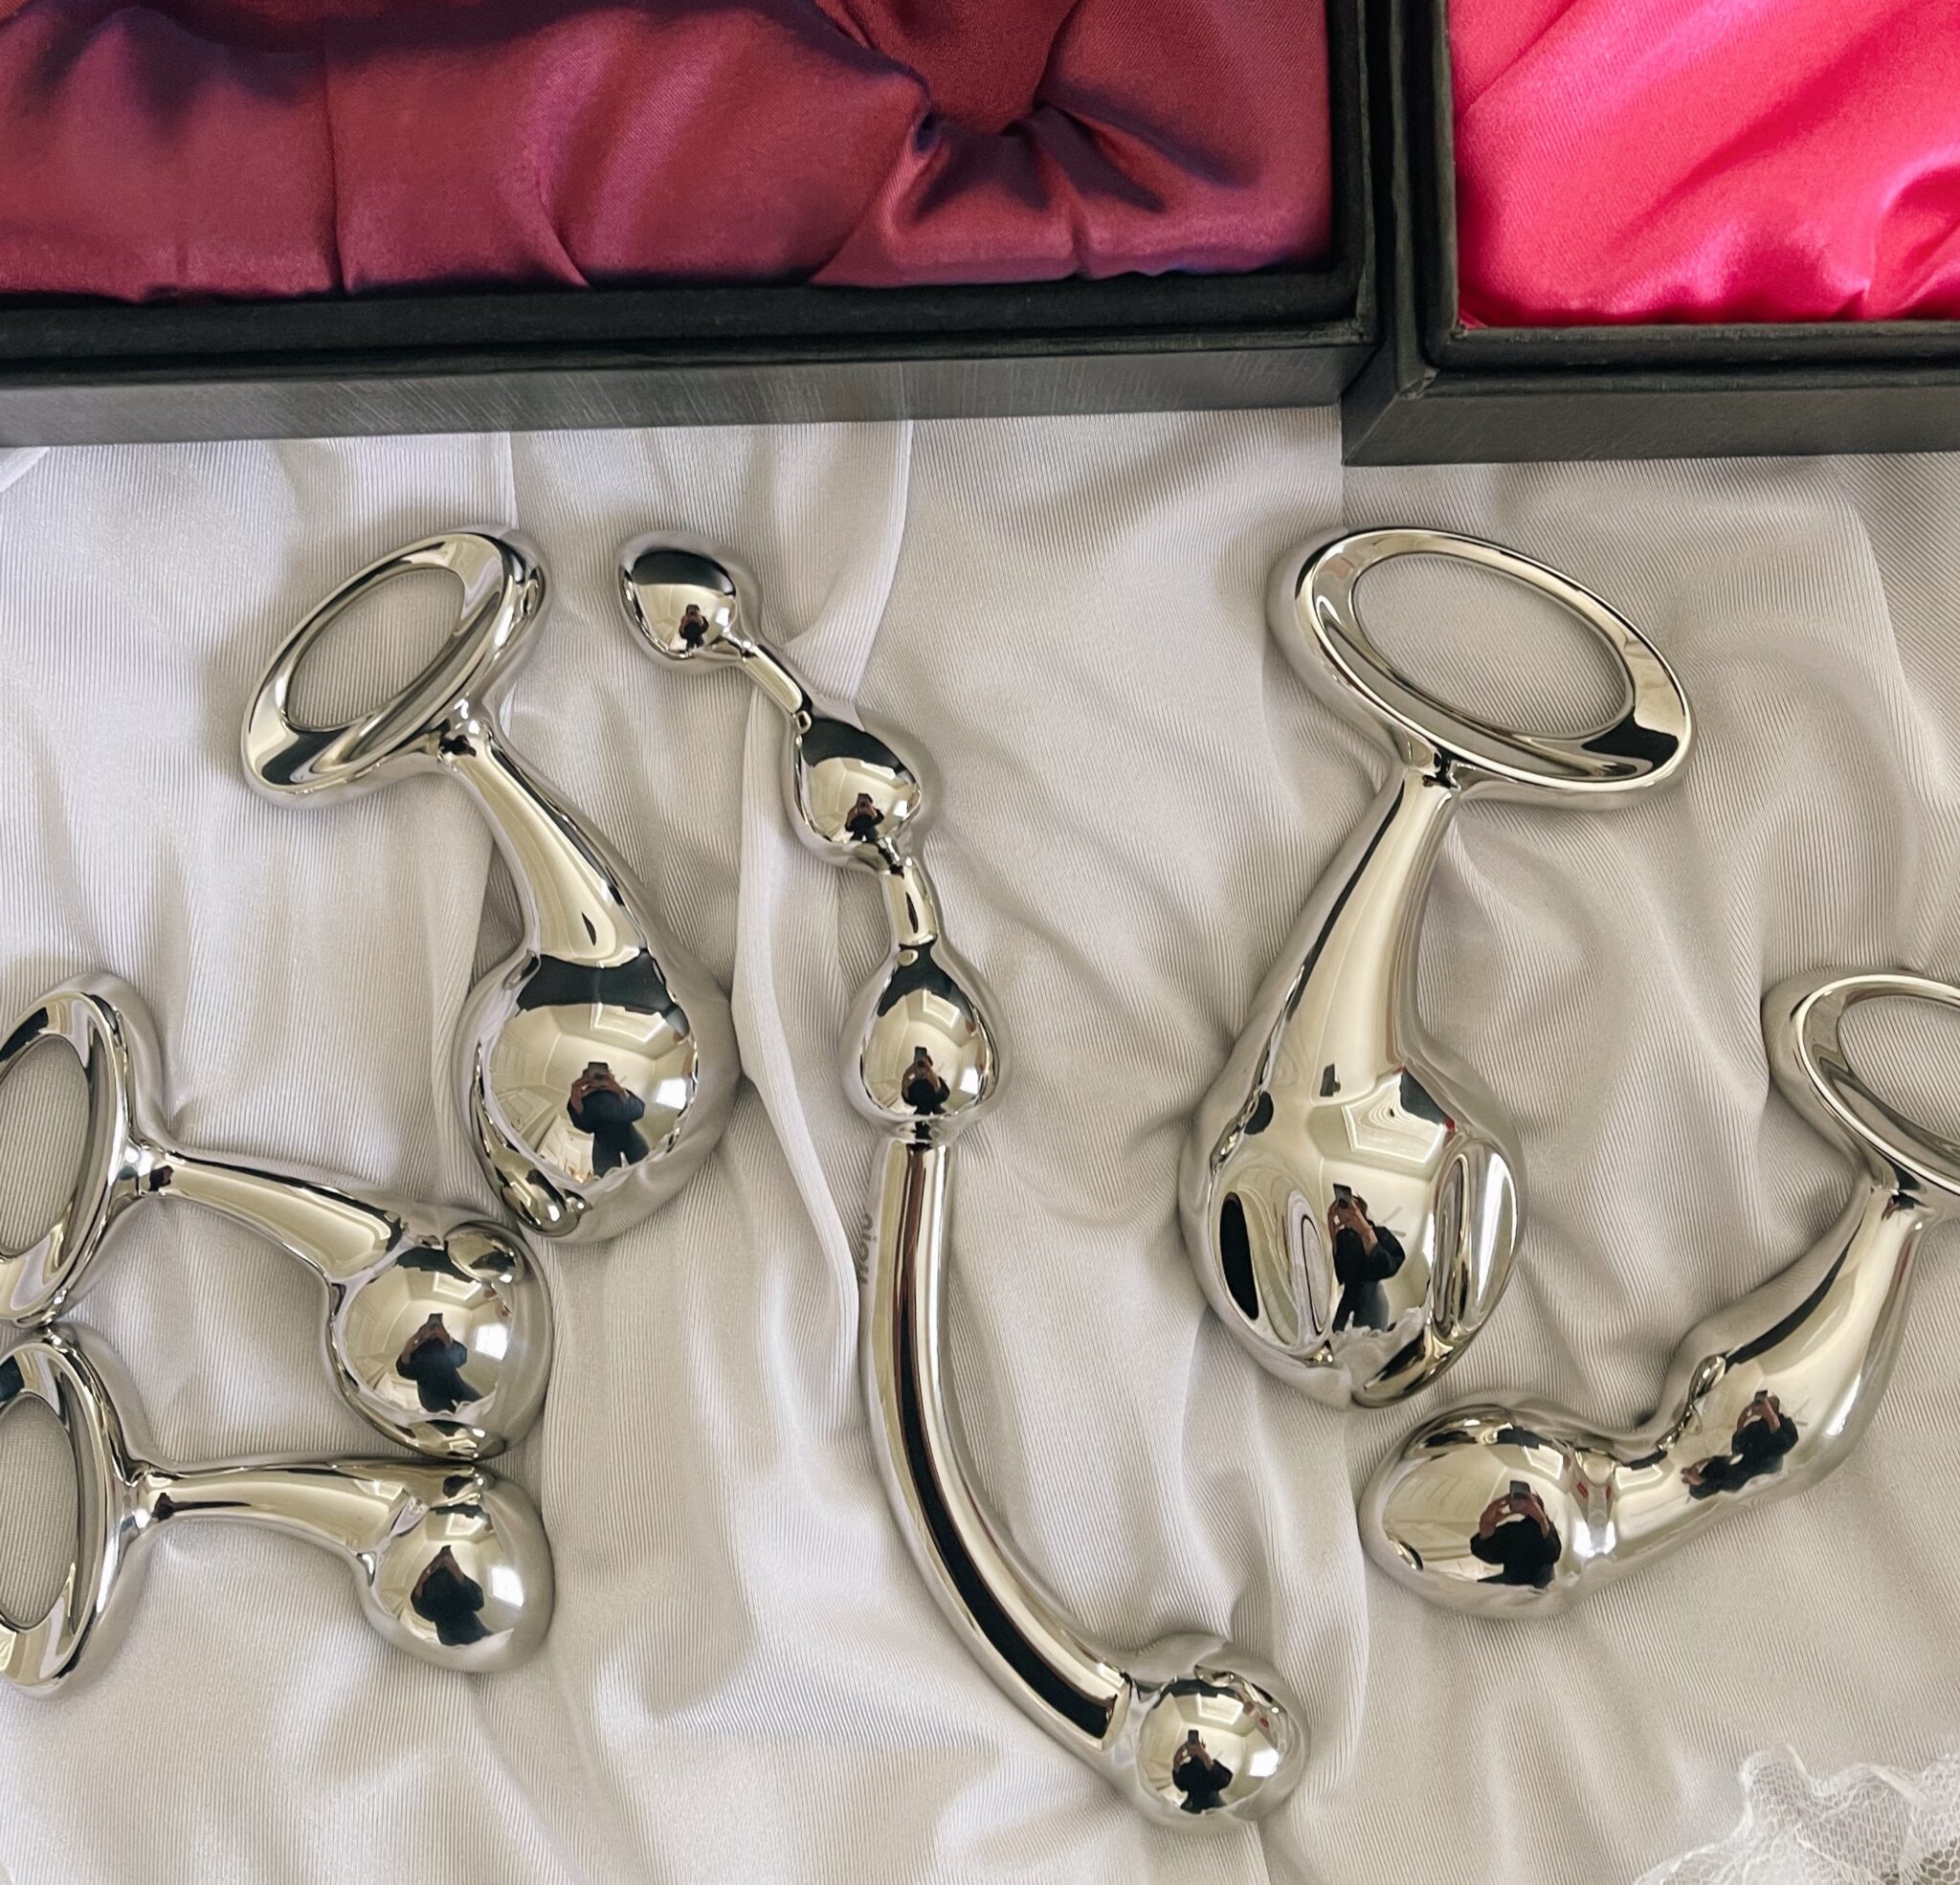 A collection of Luxury Toy X stainless steel plugs and G-spot stimulators.